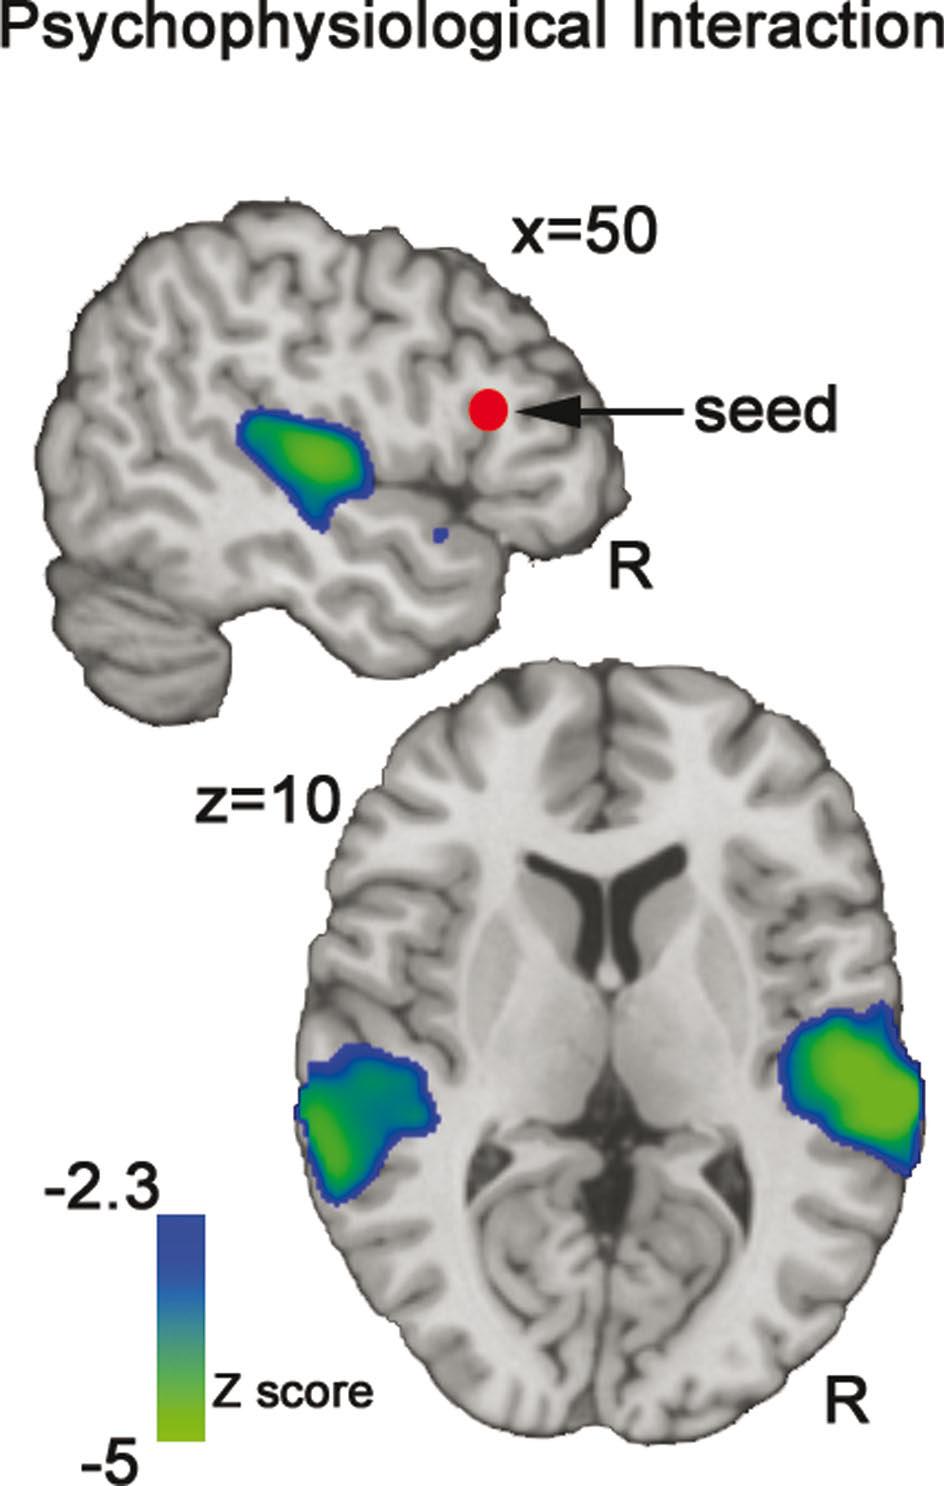 FIGURE 6 Psychophysiological (PPI). This functional connectivity analysis map illustrates the negative interaction between ZCUE and the mean timeseries of IFG seed region (red sphere).